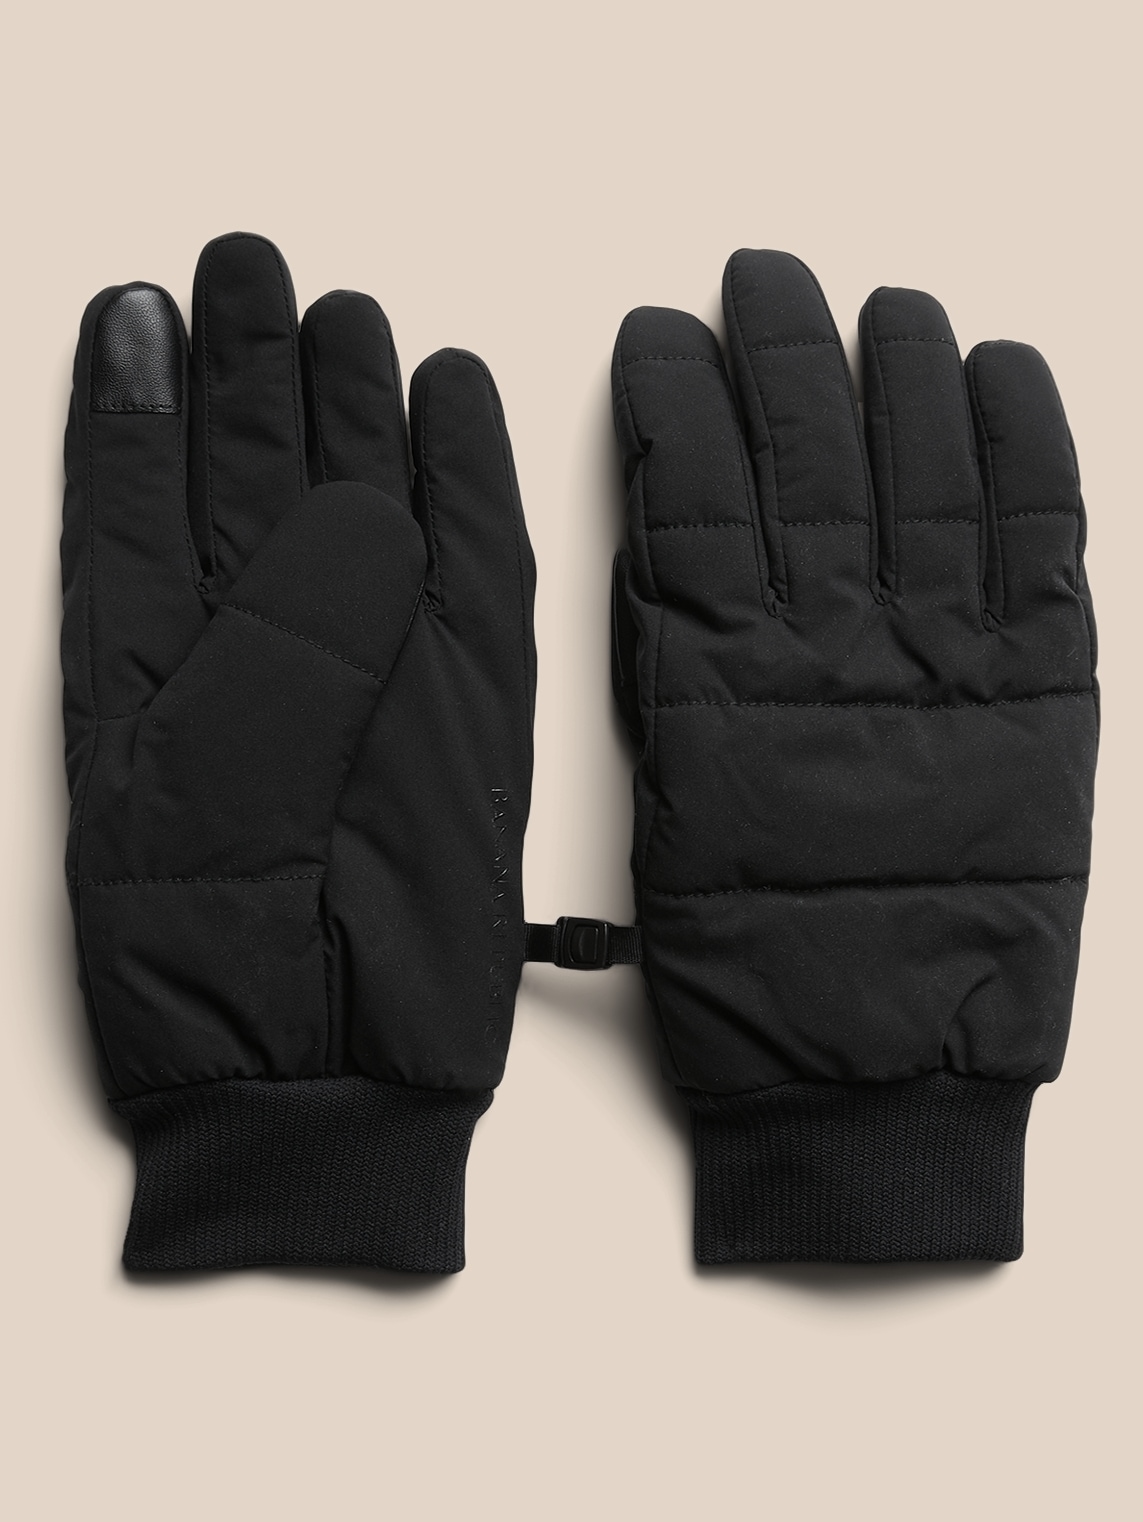 Banana Republic Motion Tech Quilted Gloves - Big Apple Buddy